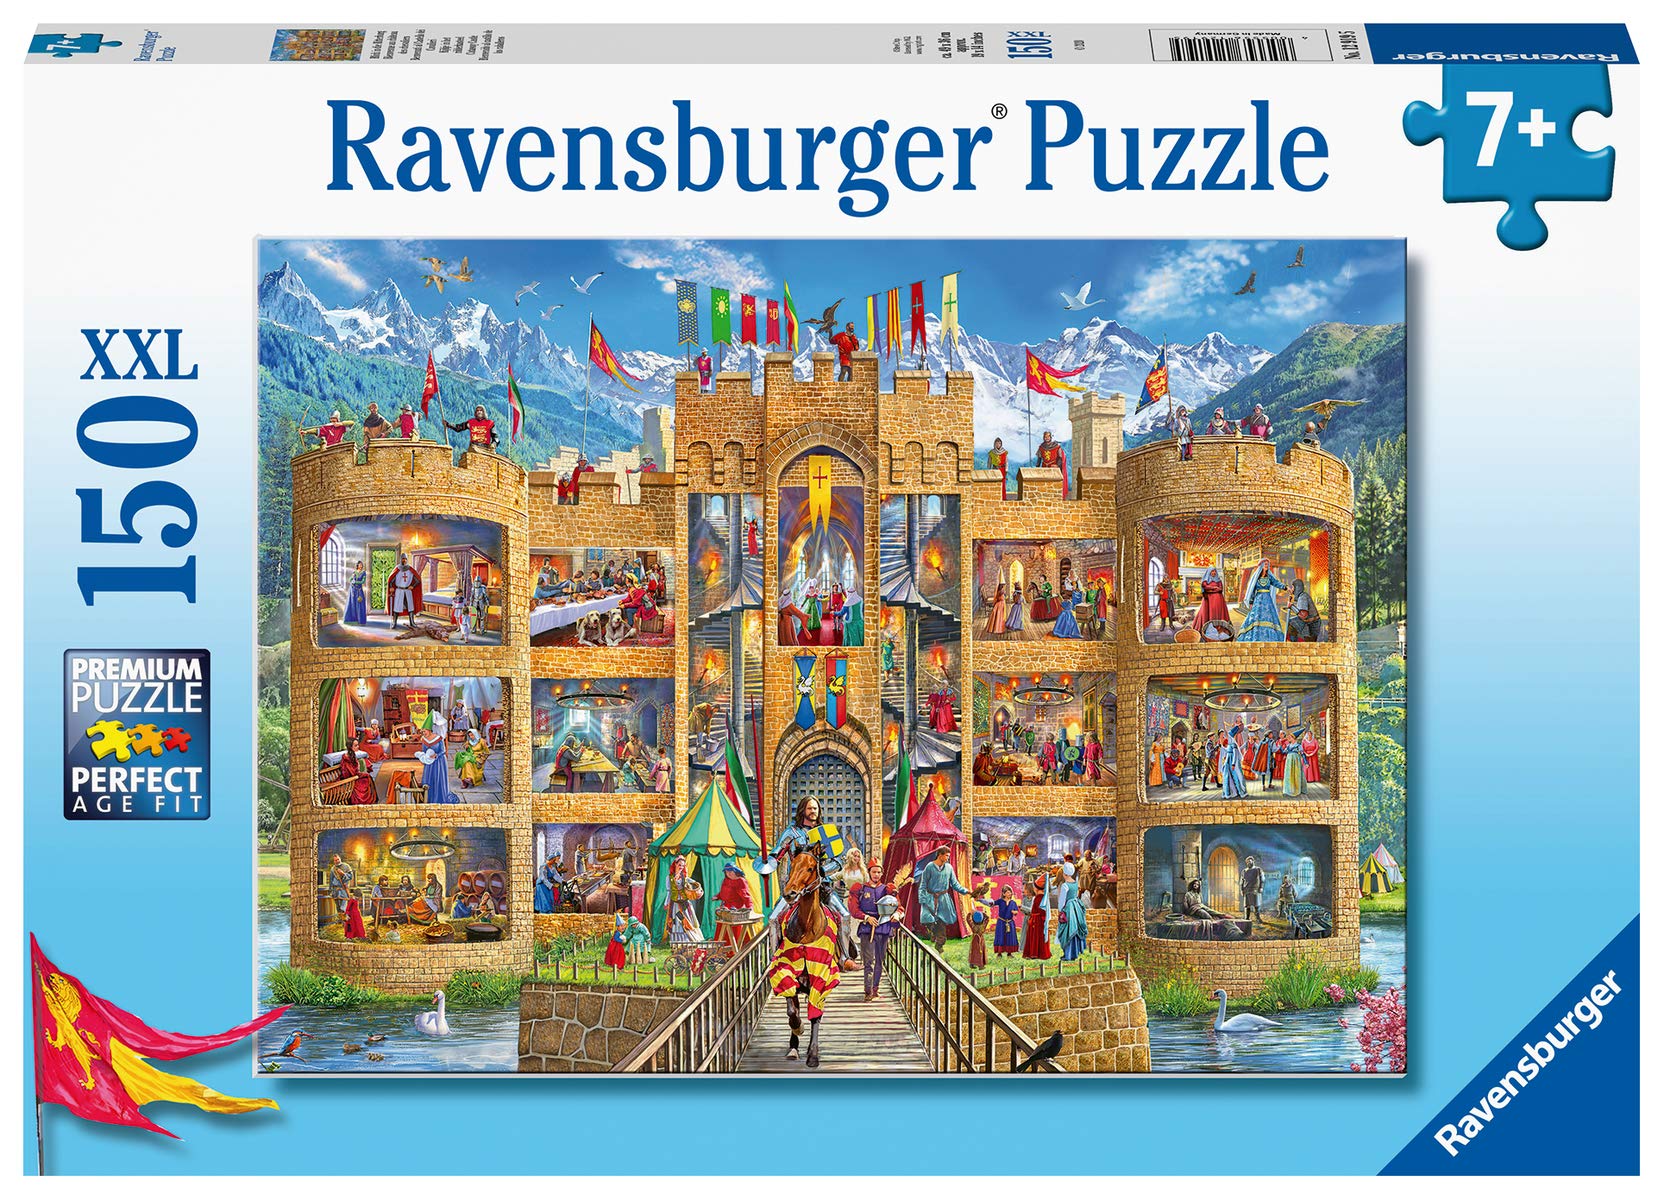 Ravensburger Castle Cutaway 150 Piece Jigsaw Puzzle for Kids - 12919 - Every Piece is Unique, Pieces Fit Together Perfectly